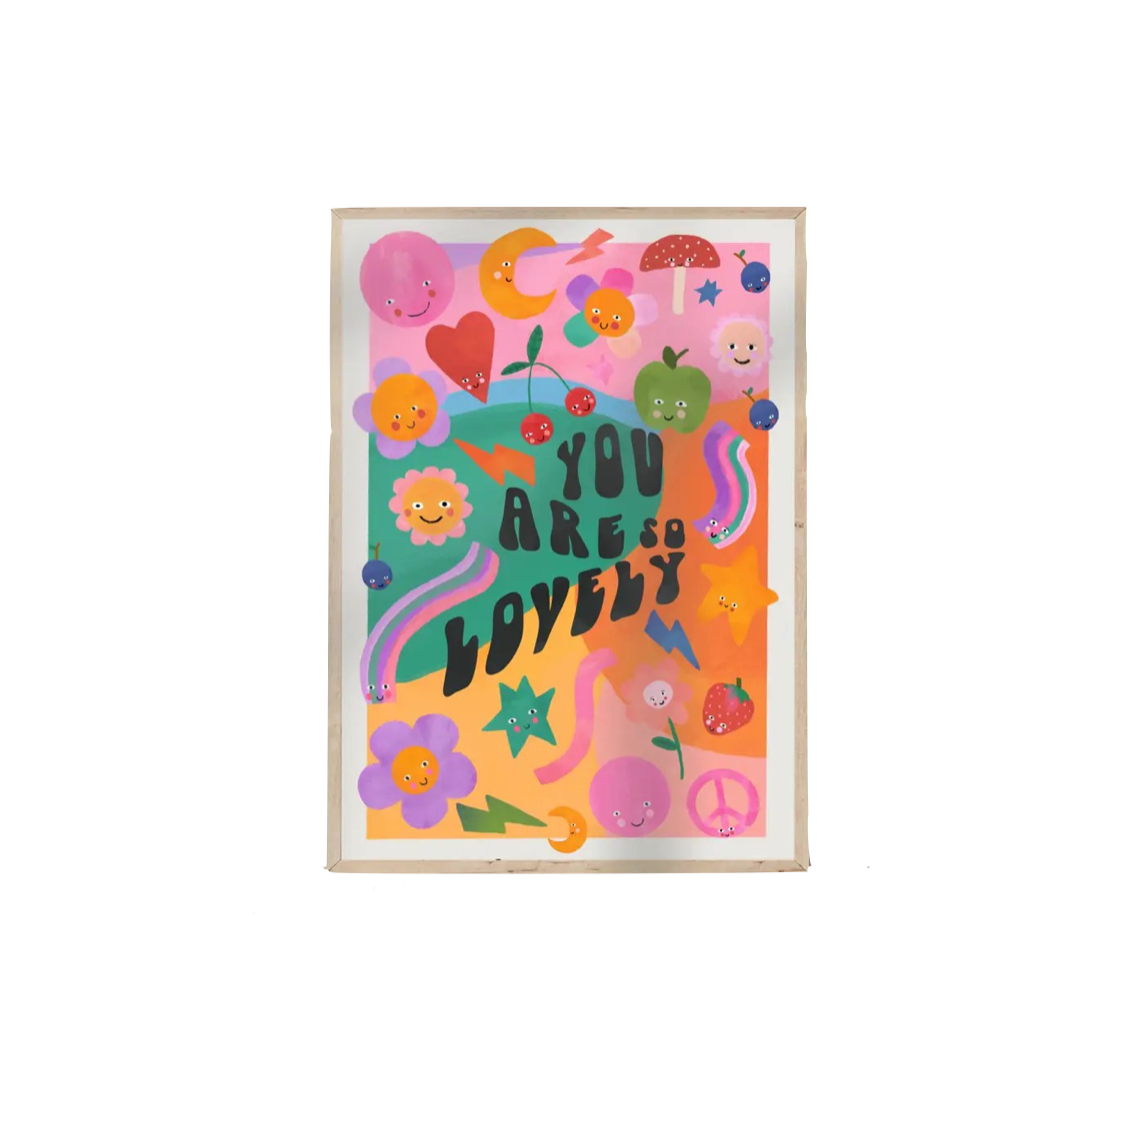 colourful children's print with flowers, hearts and more and black text reading 'you are so lovely'